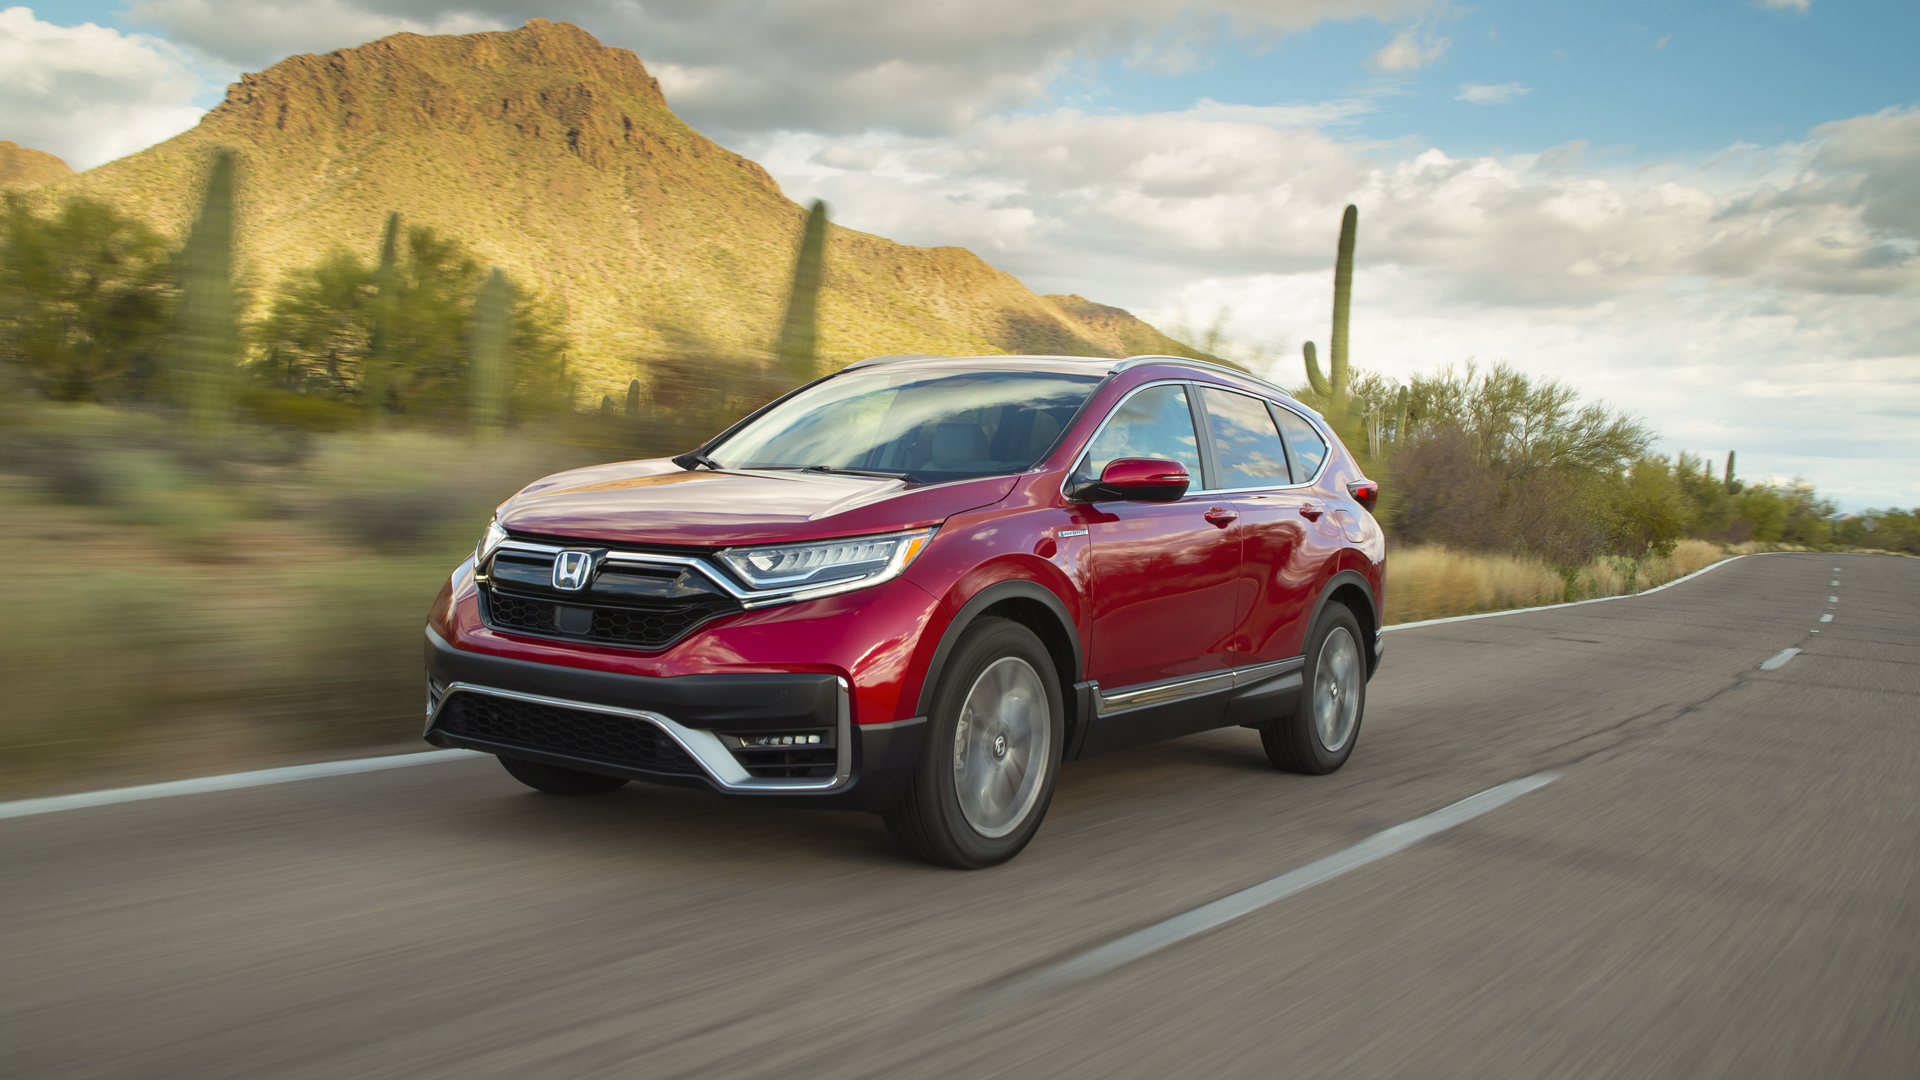 2020 Honda CR-V Hybrid First Drive | What's new, fuel economy, driving